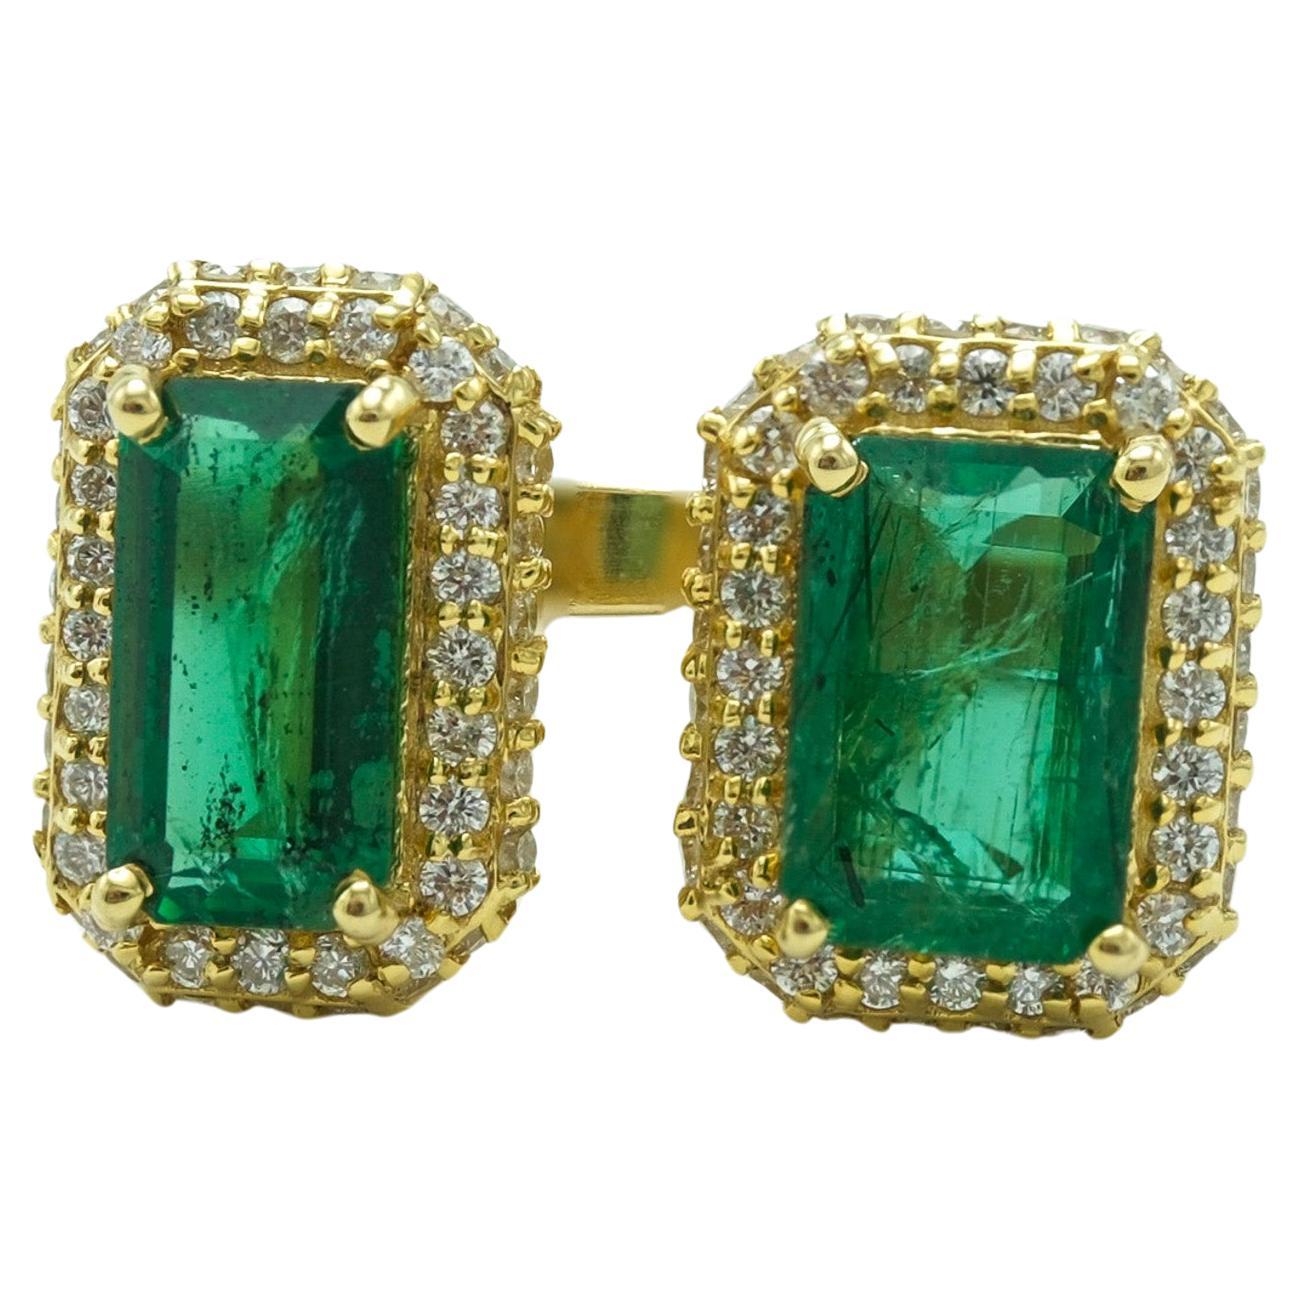 This ring is elegantly constructed from 18-karat yellow gold and showcases two emerald-cut emeralds with a total weight of 3.5 carats. The gemstones radiate a deep, vibrant green, and are framed by a halo of round diamonds totaling 0.5 carats. The